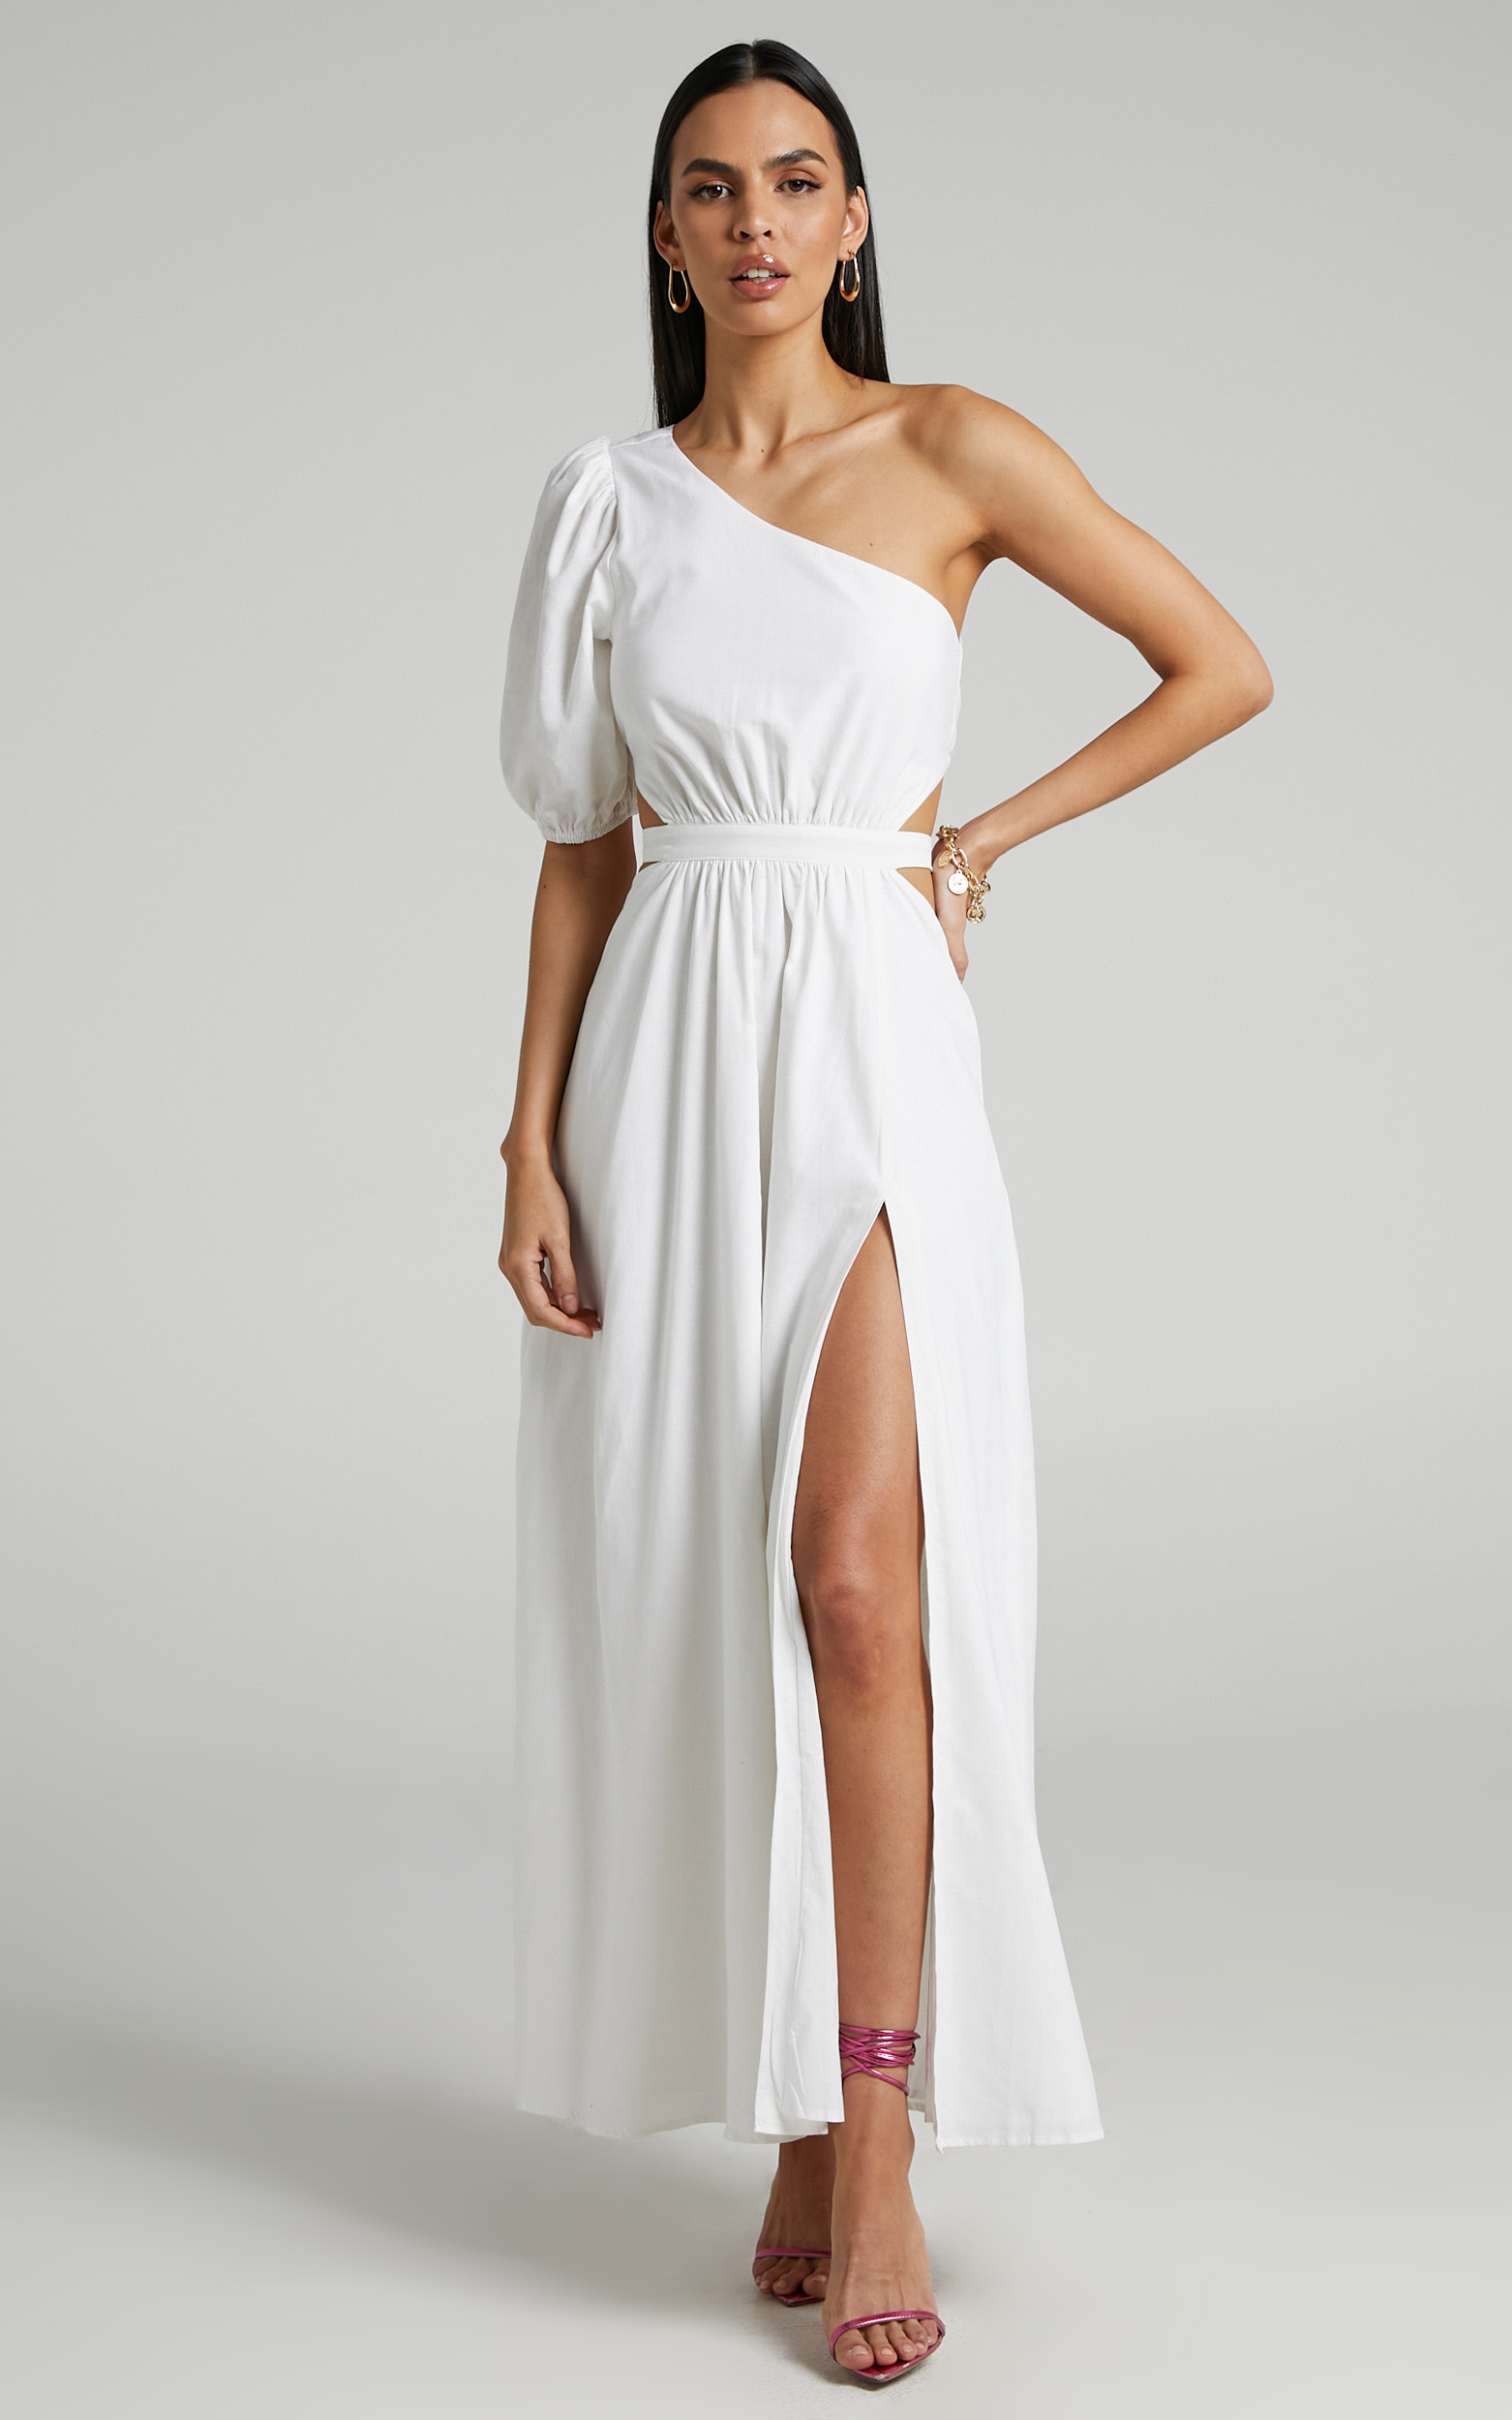 Cedie One Shoulder Puff Sleeve Maxi Dress in White - 04, WHT1, hi-res image number null